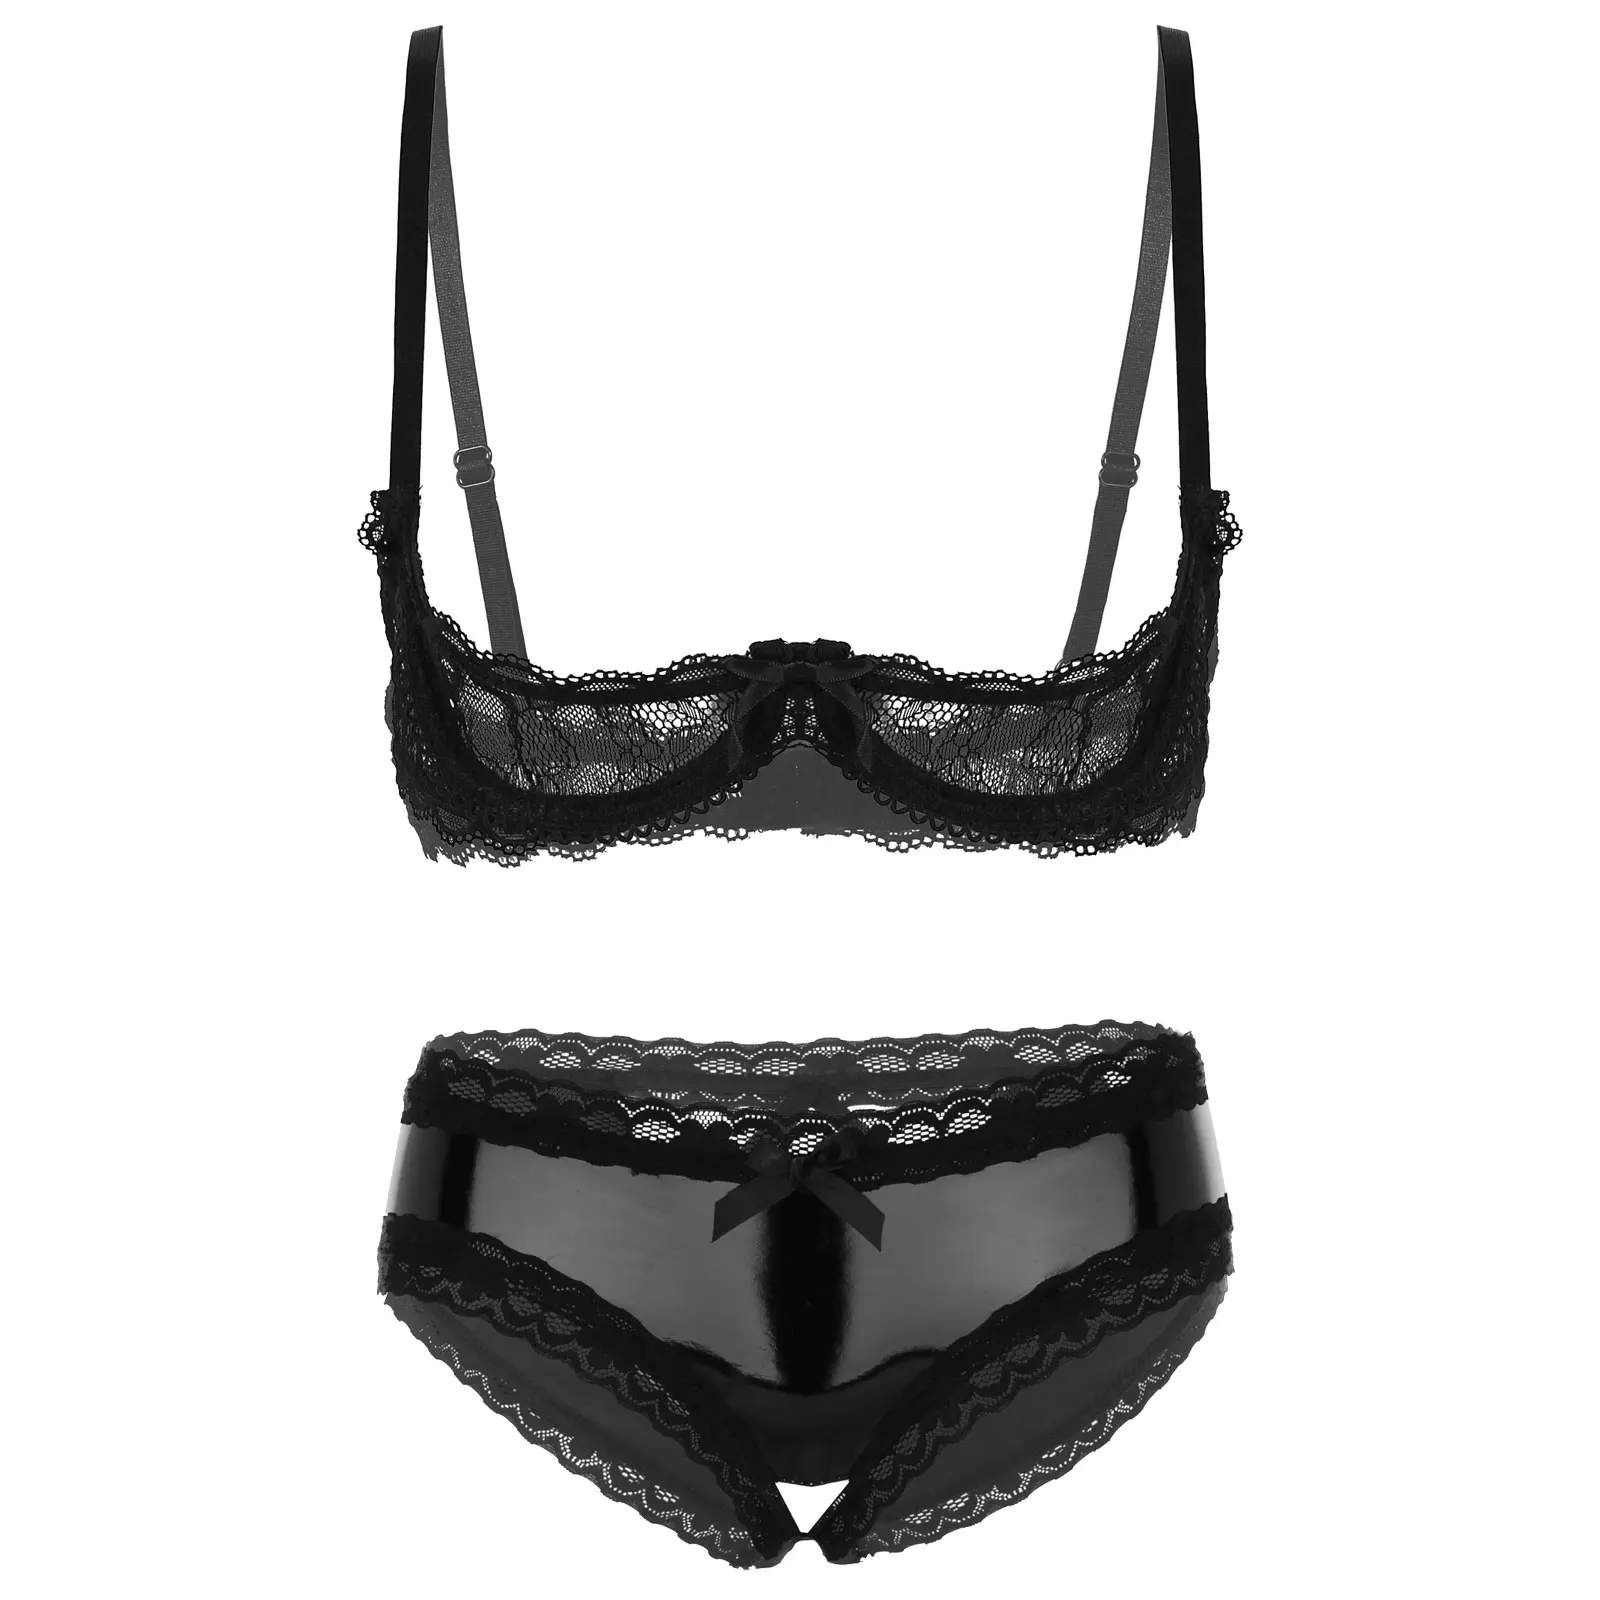 

Women Hallow Out Sexy Lingerie Suit Sissy Party Clubwear Ladies Lace Sheer Underwire Bras with Patent Leather Crotchless Briefs